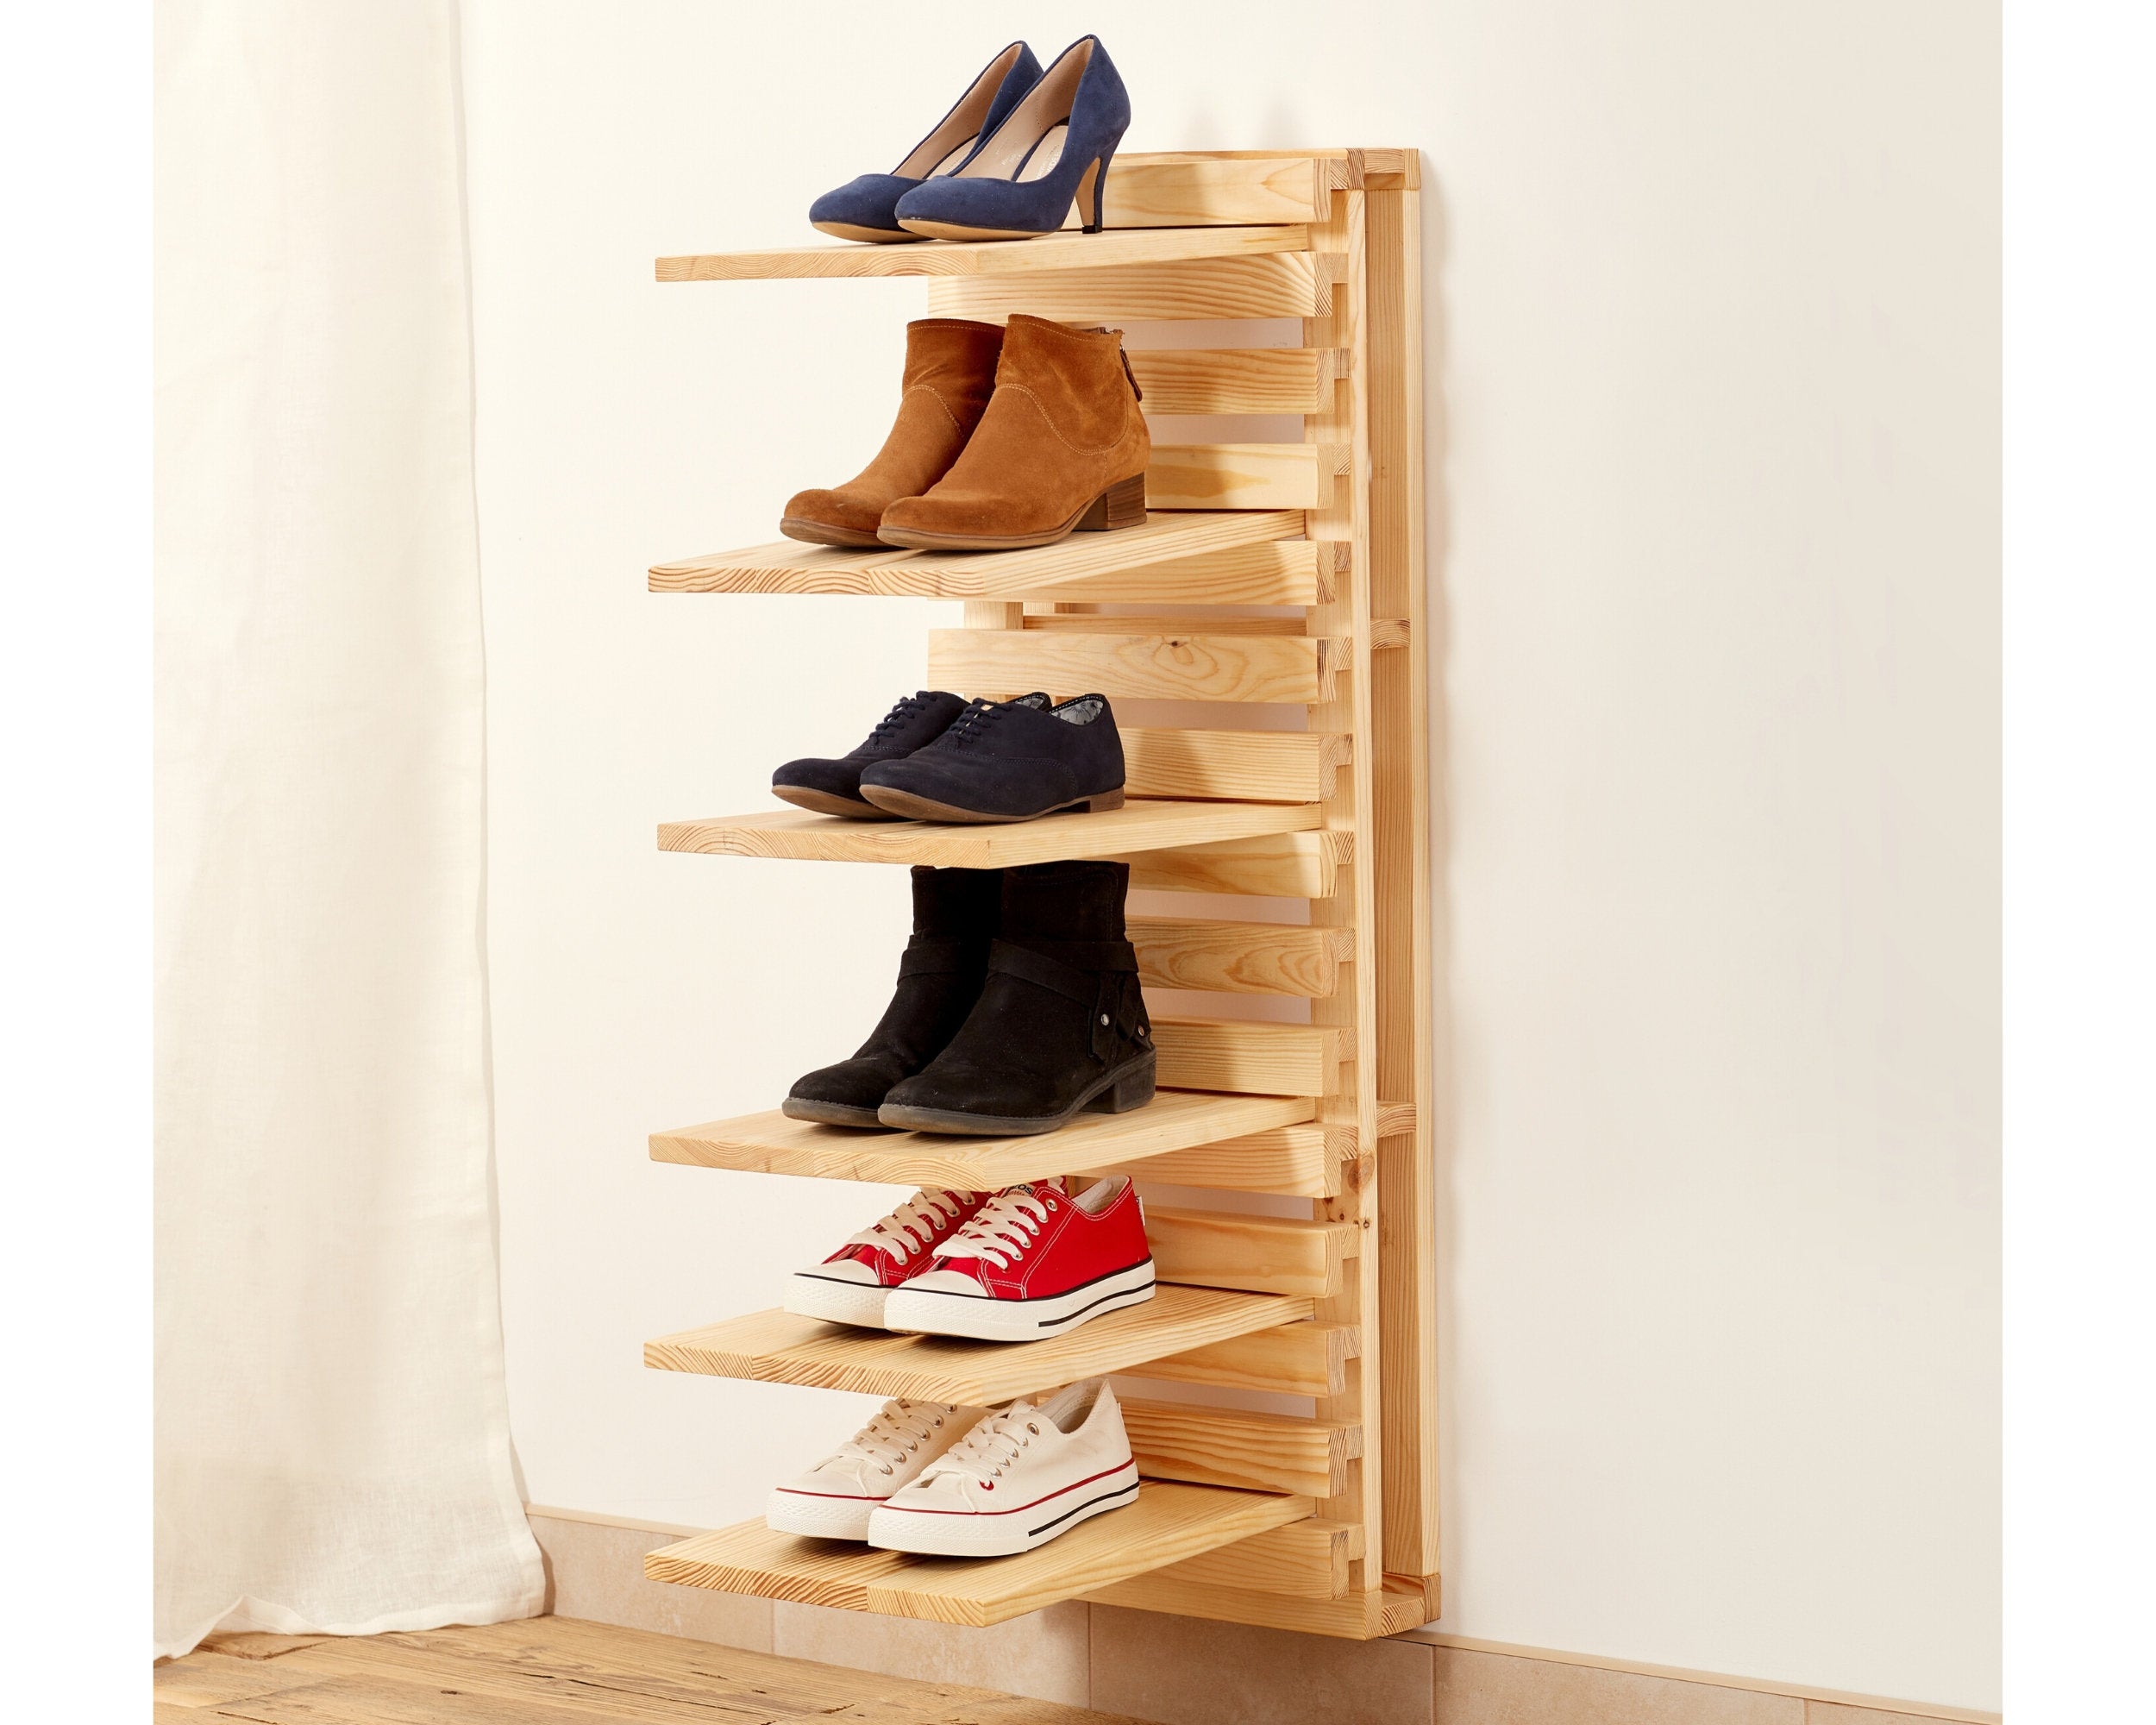 Wall Mounted Wooden Shoe Organizer Modern And Functional Shoe Shelf - Entryway Space Saving Footwear Organiser With 6 Adjustable Shelves